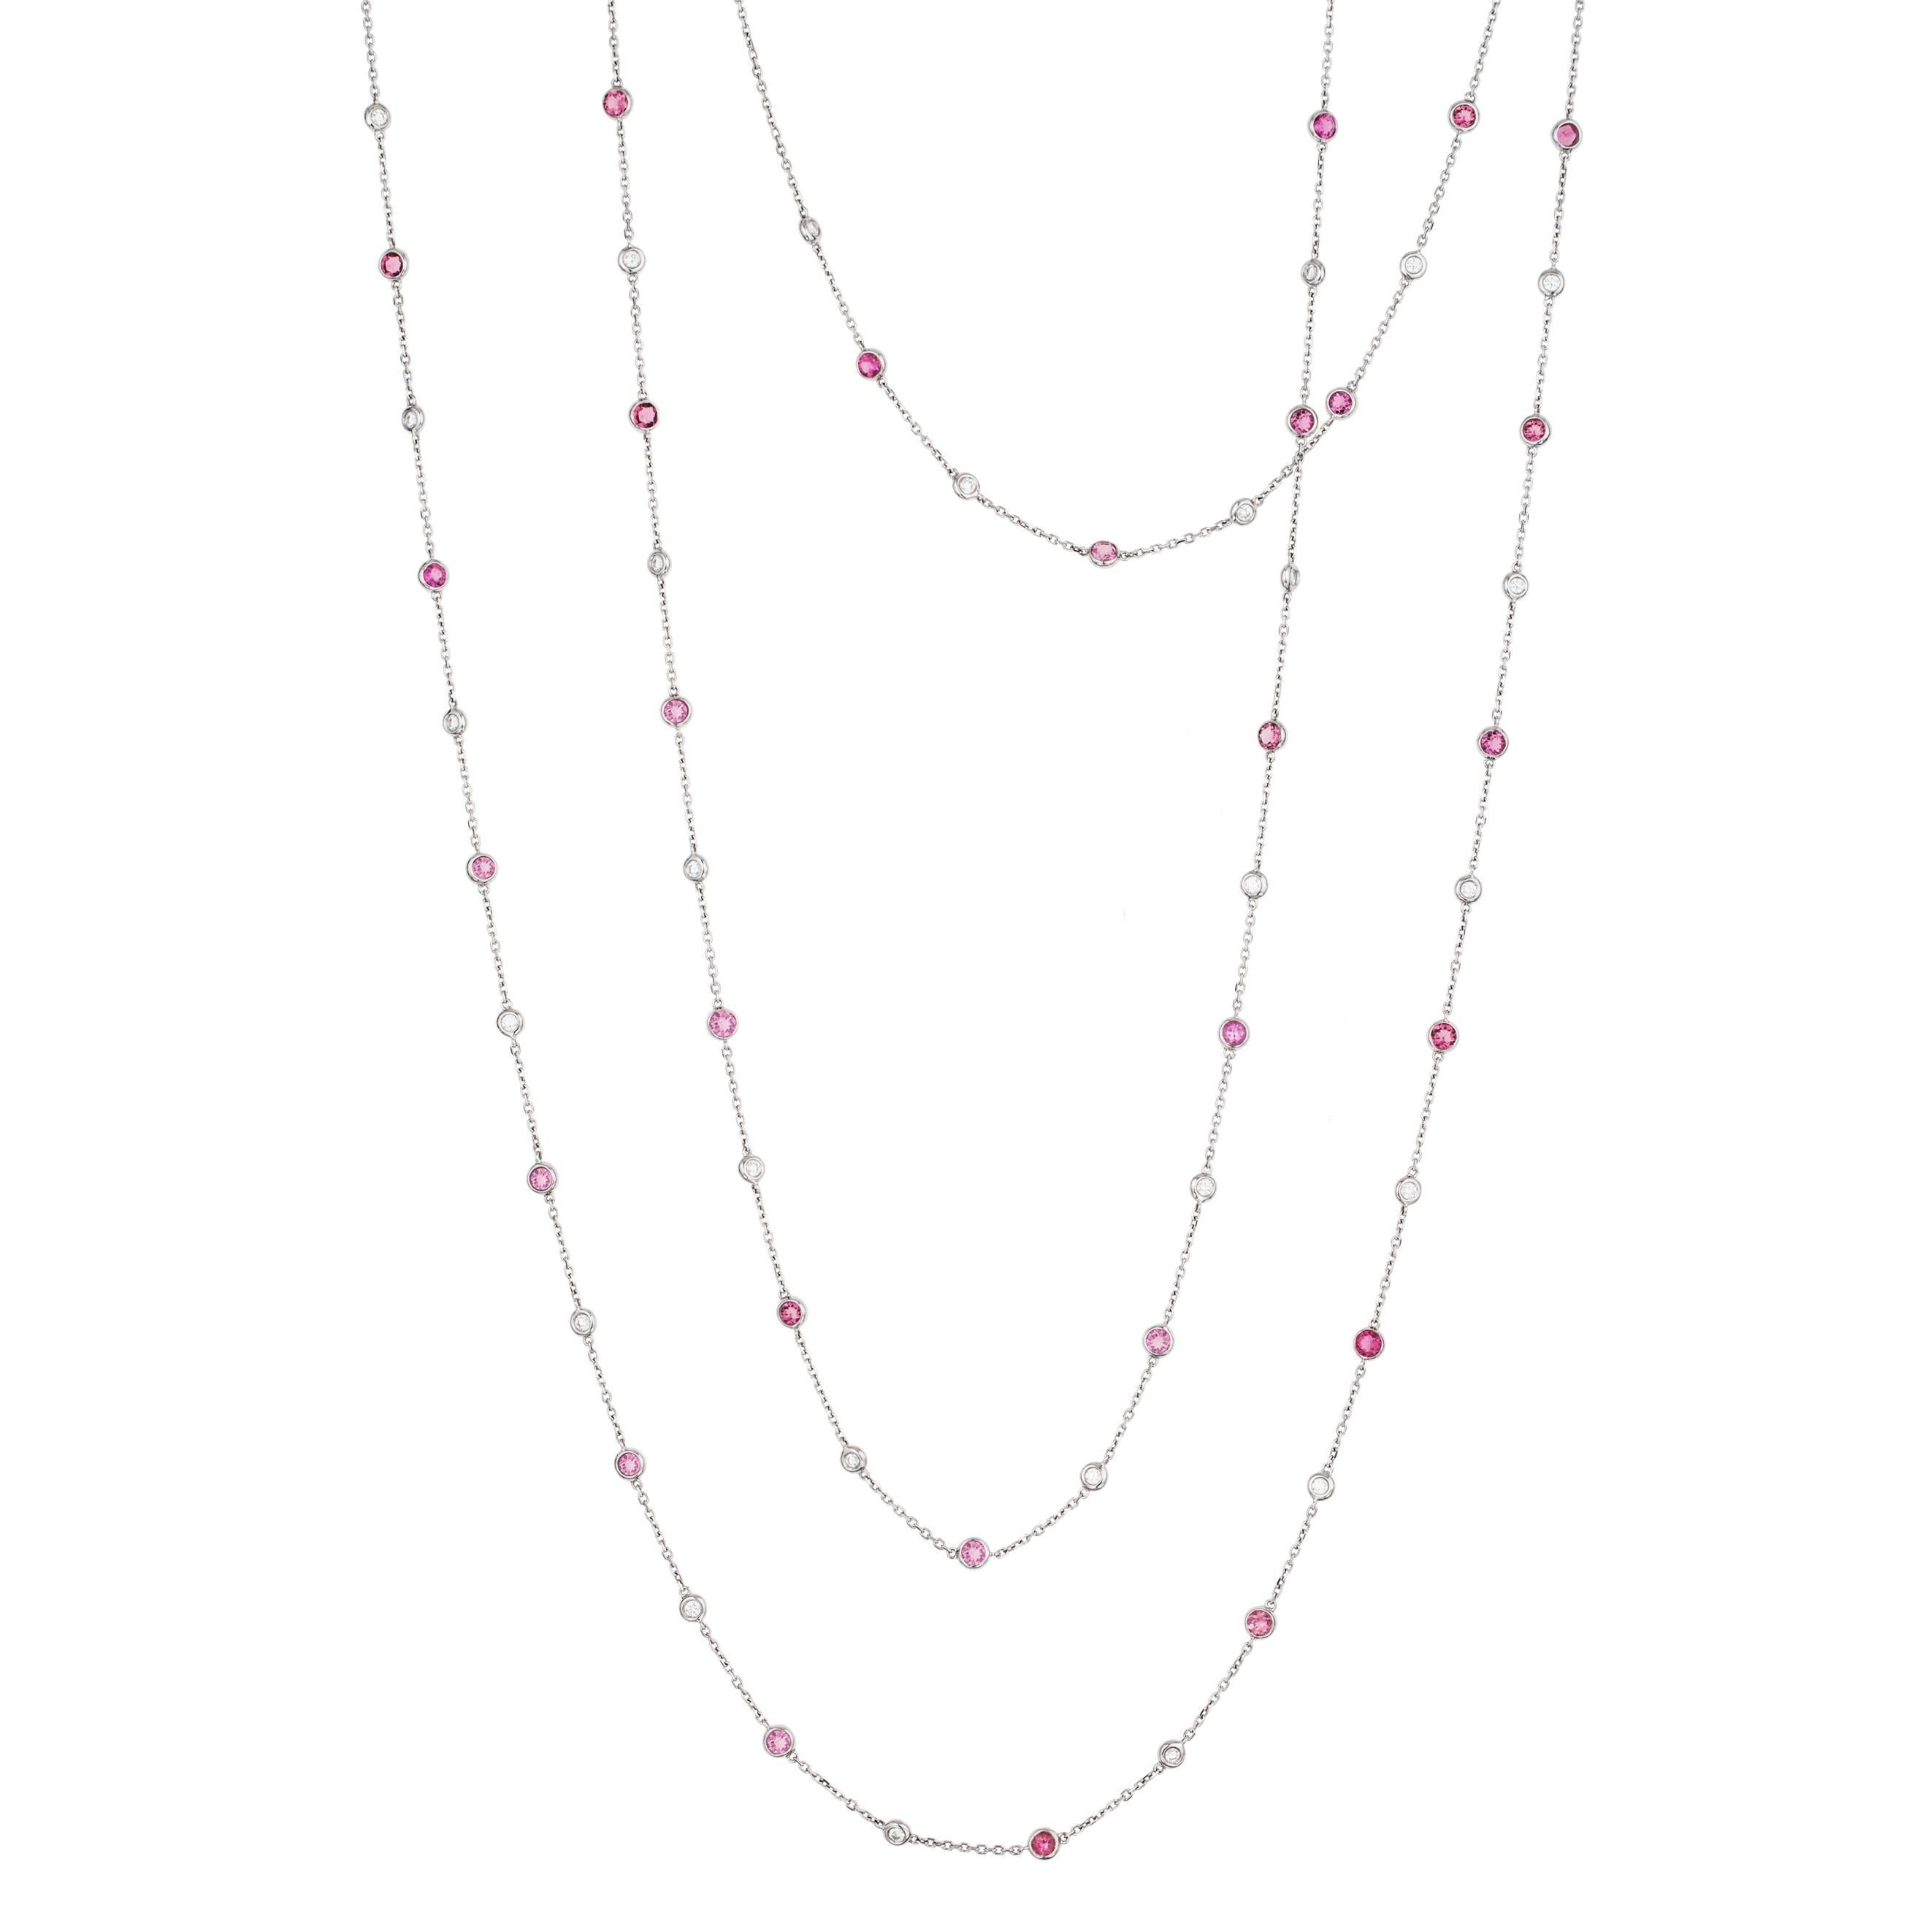 Diamond and Pink Tourmaline "Lucky Necklace" For Sale